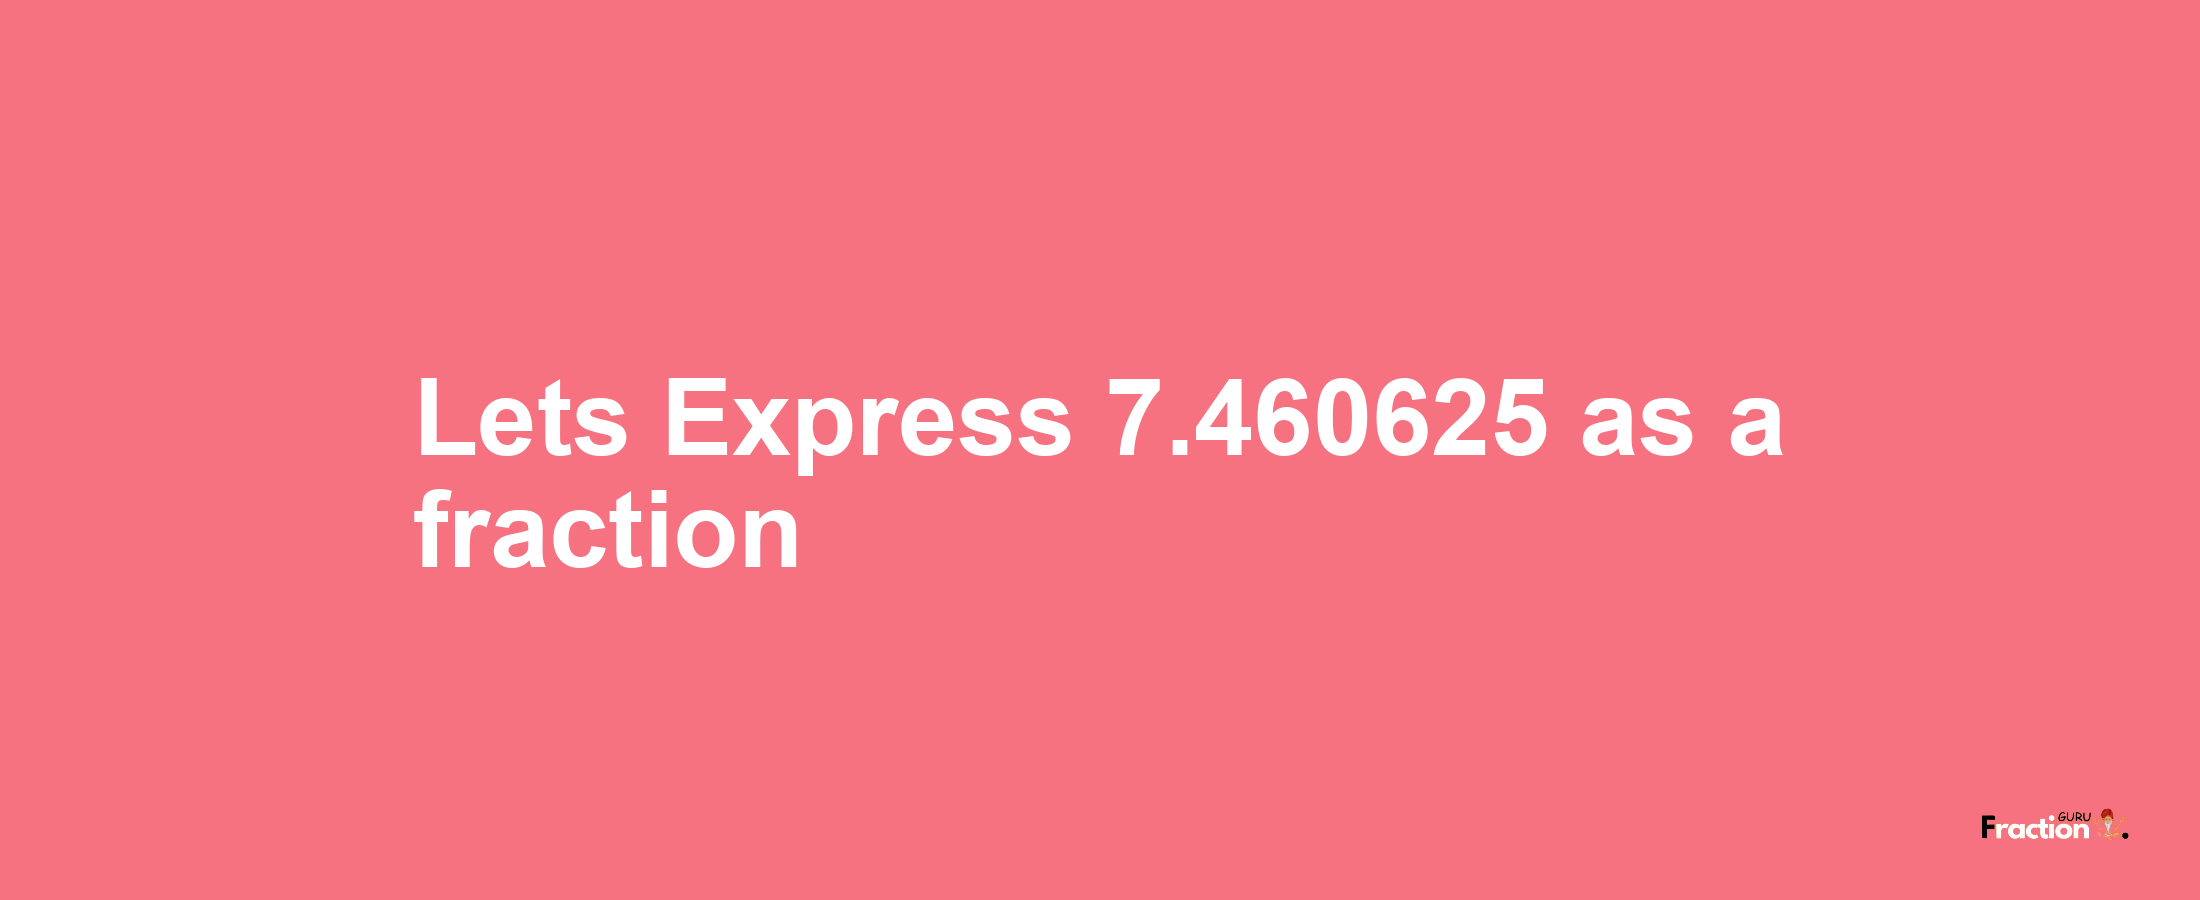 Lets Express 7.460625 as afraction